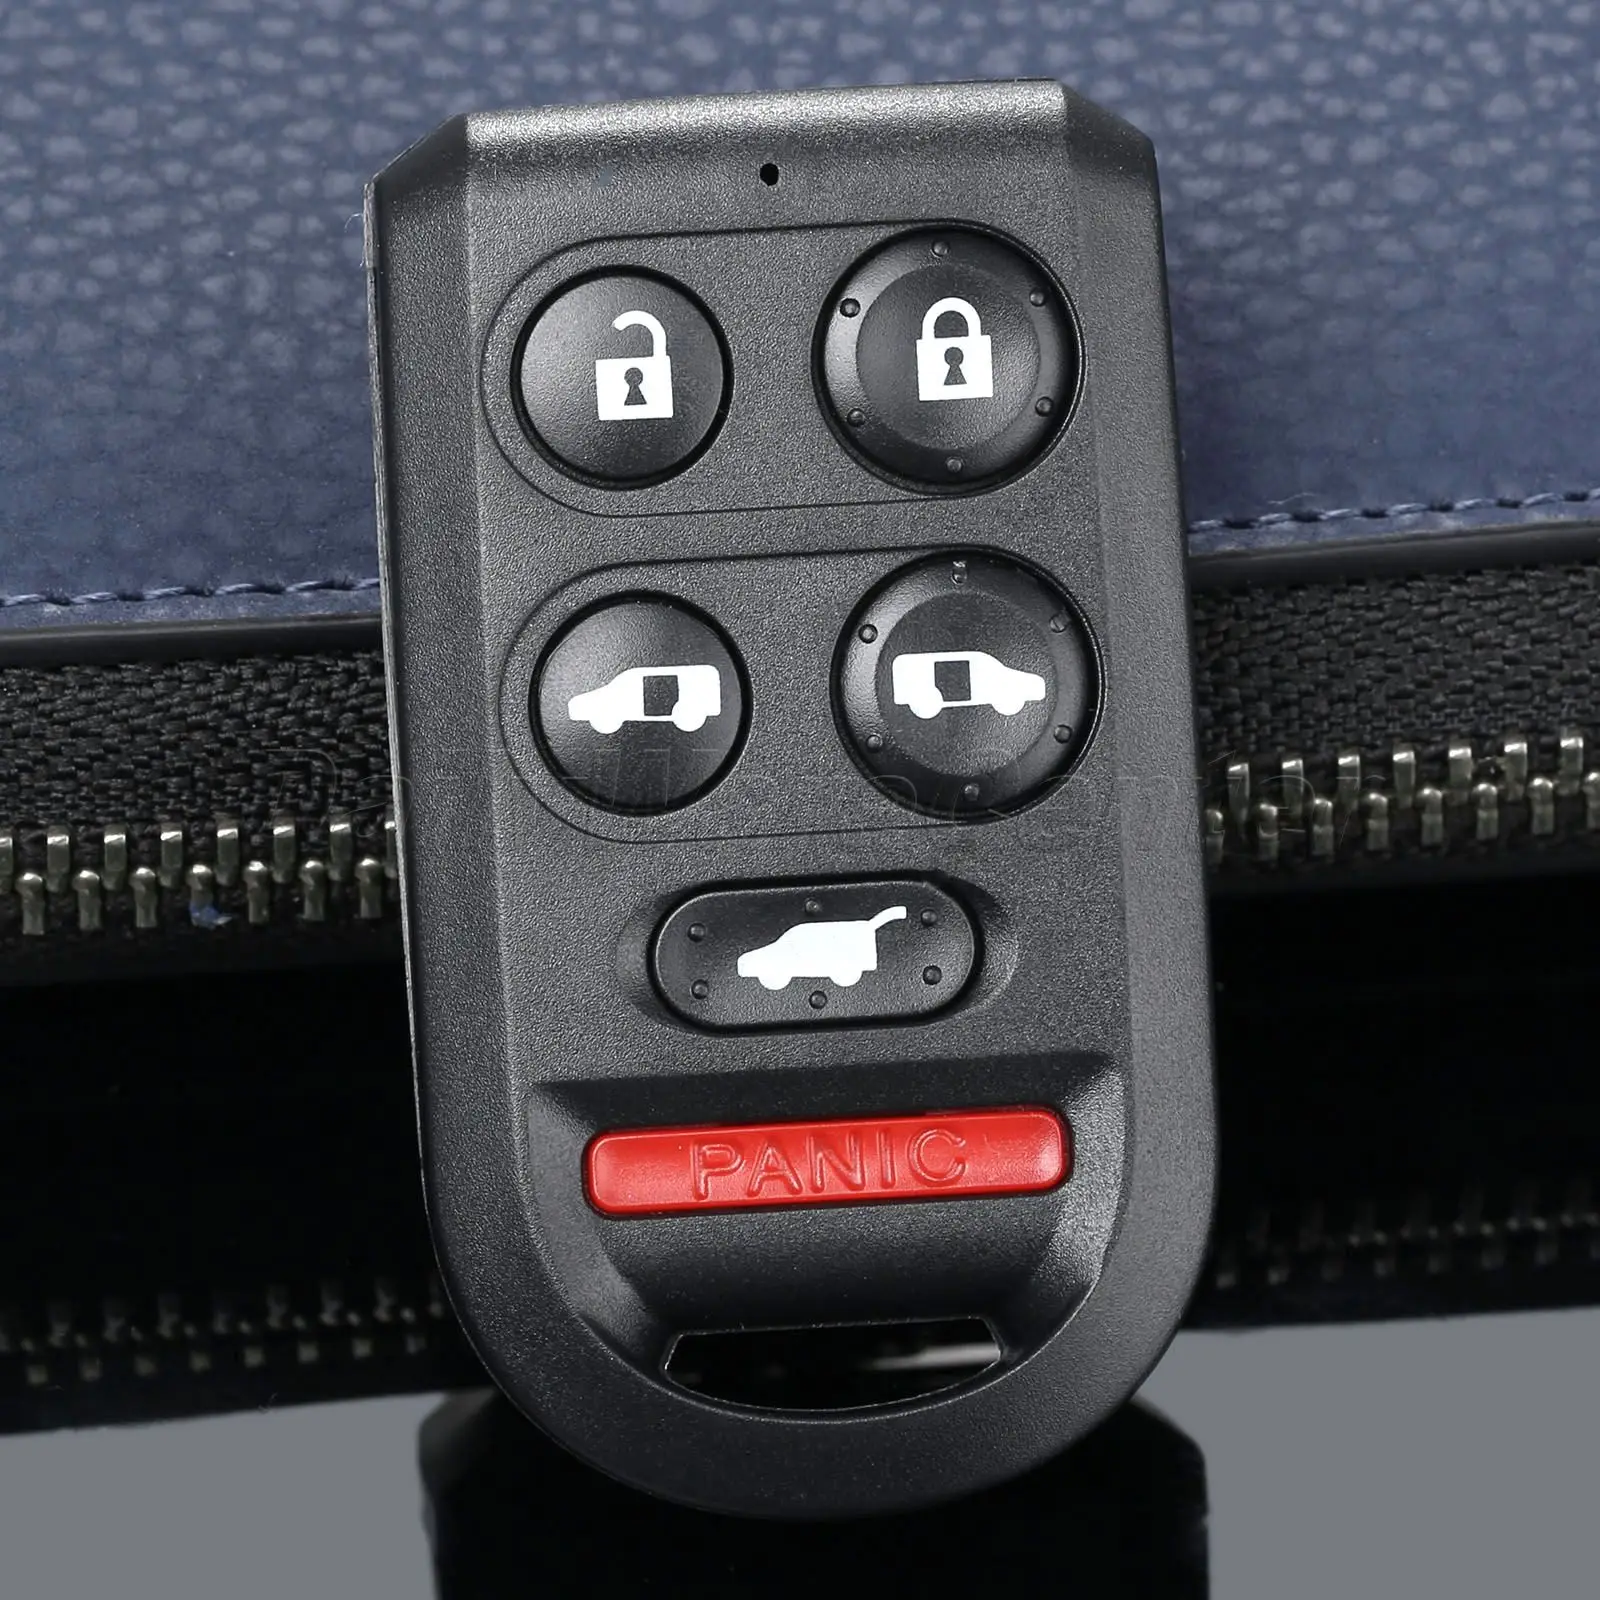 

For HONDA Odyssey 2005-2010 Repalcement Case Key Keyless Entry Remote Key Fob Shell 6 Buttons PG216B Car Key Case Covers